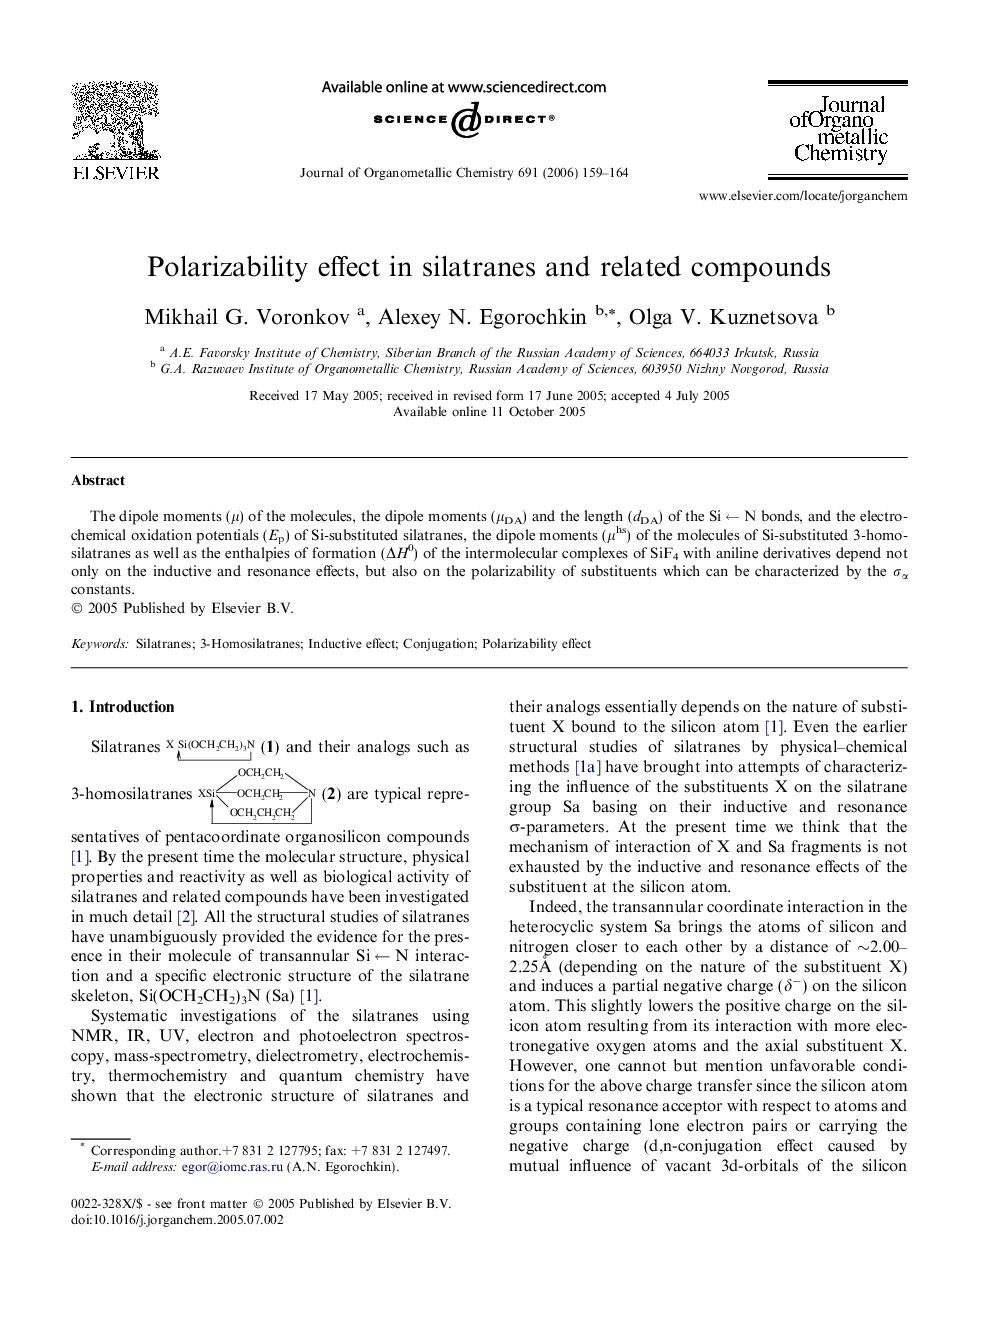 Polarizability effect in silatranes and related compounds